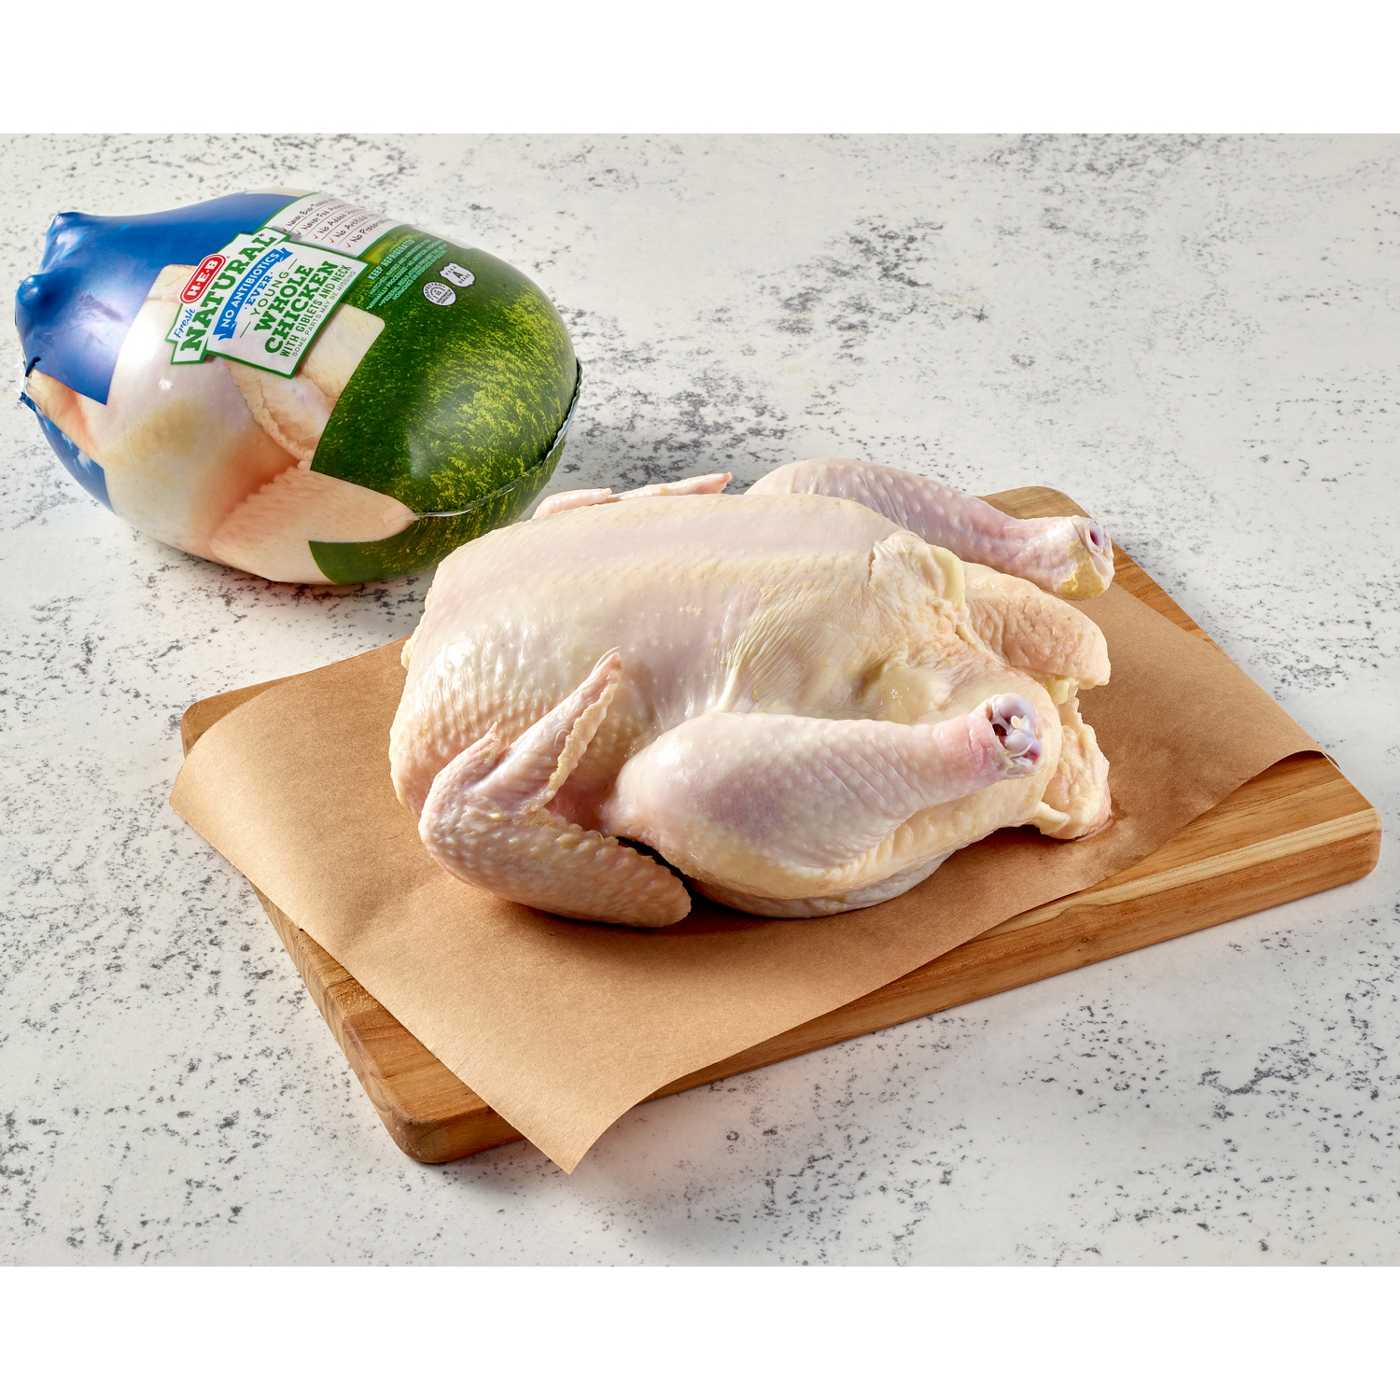 H-E-B Natural Fresh Whole Chicken; image 2 of 3